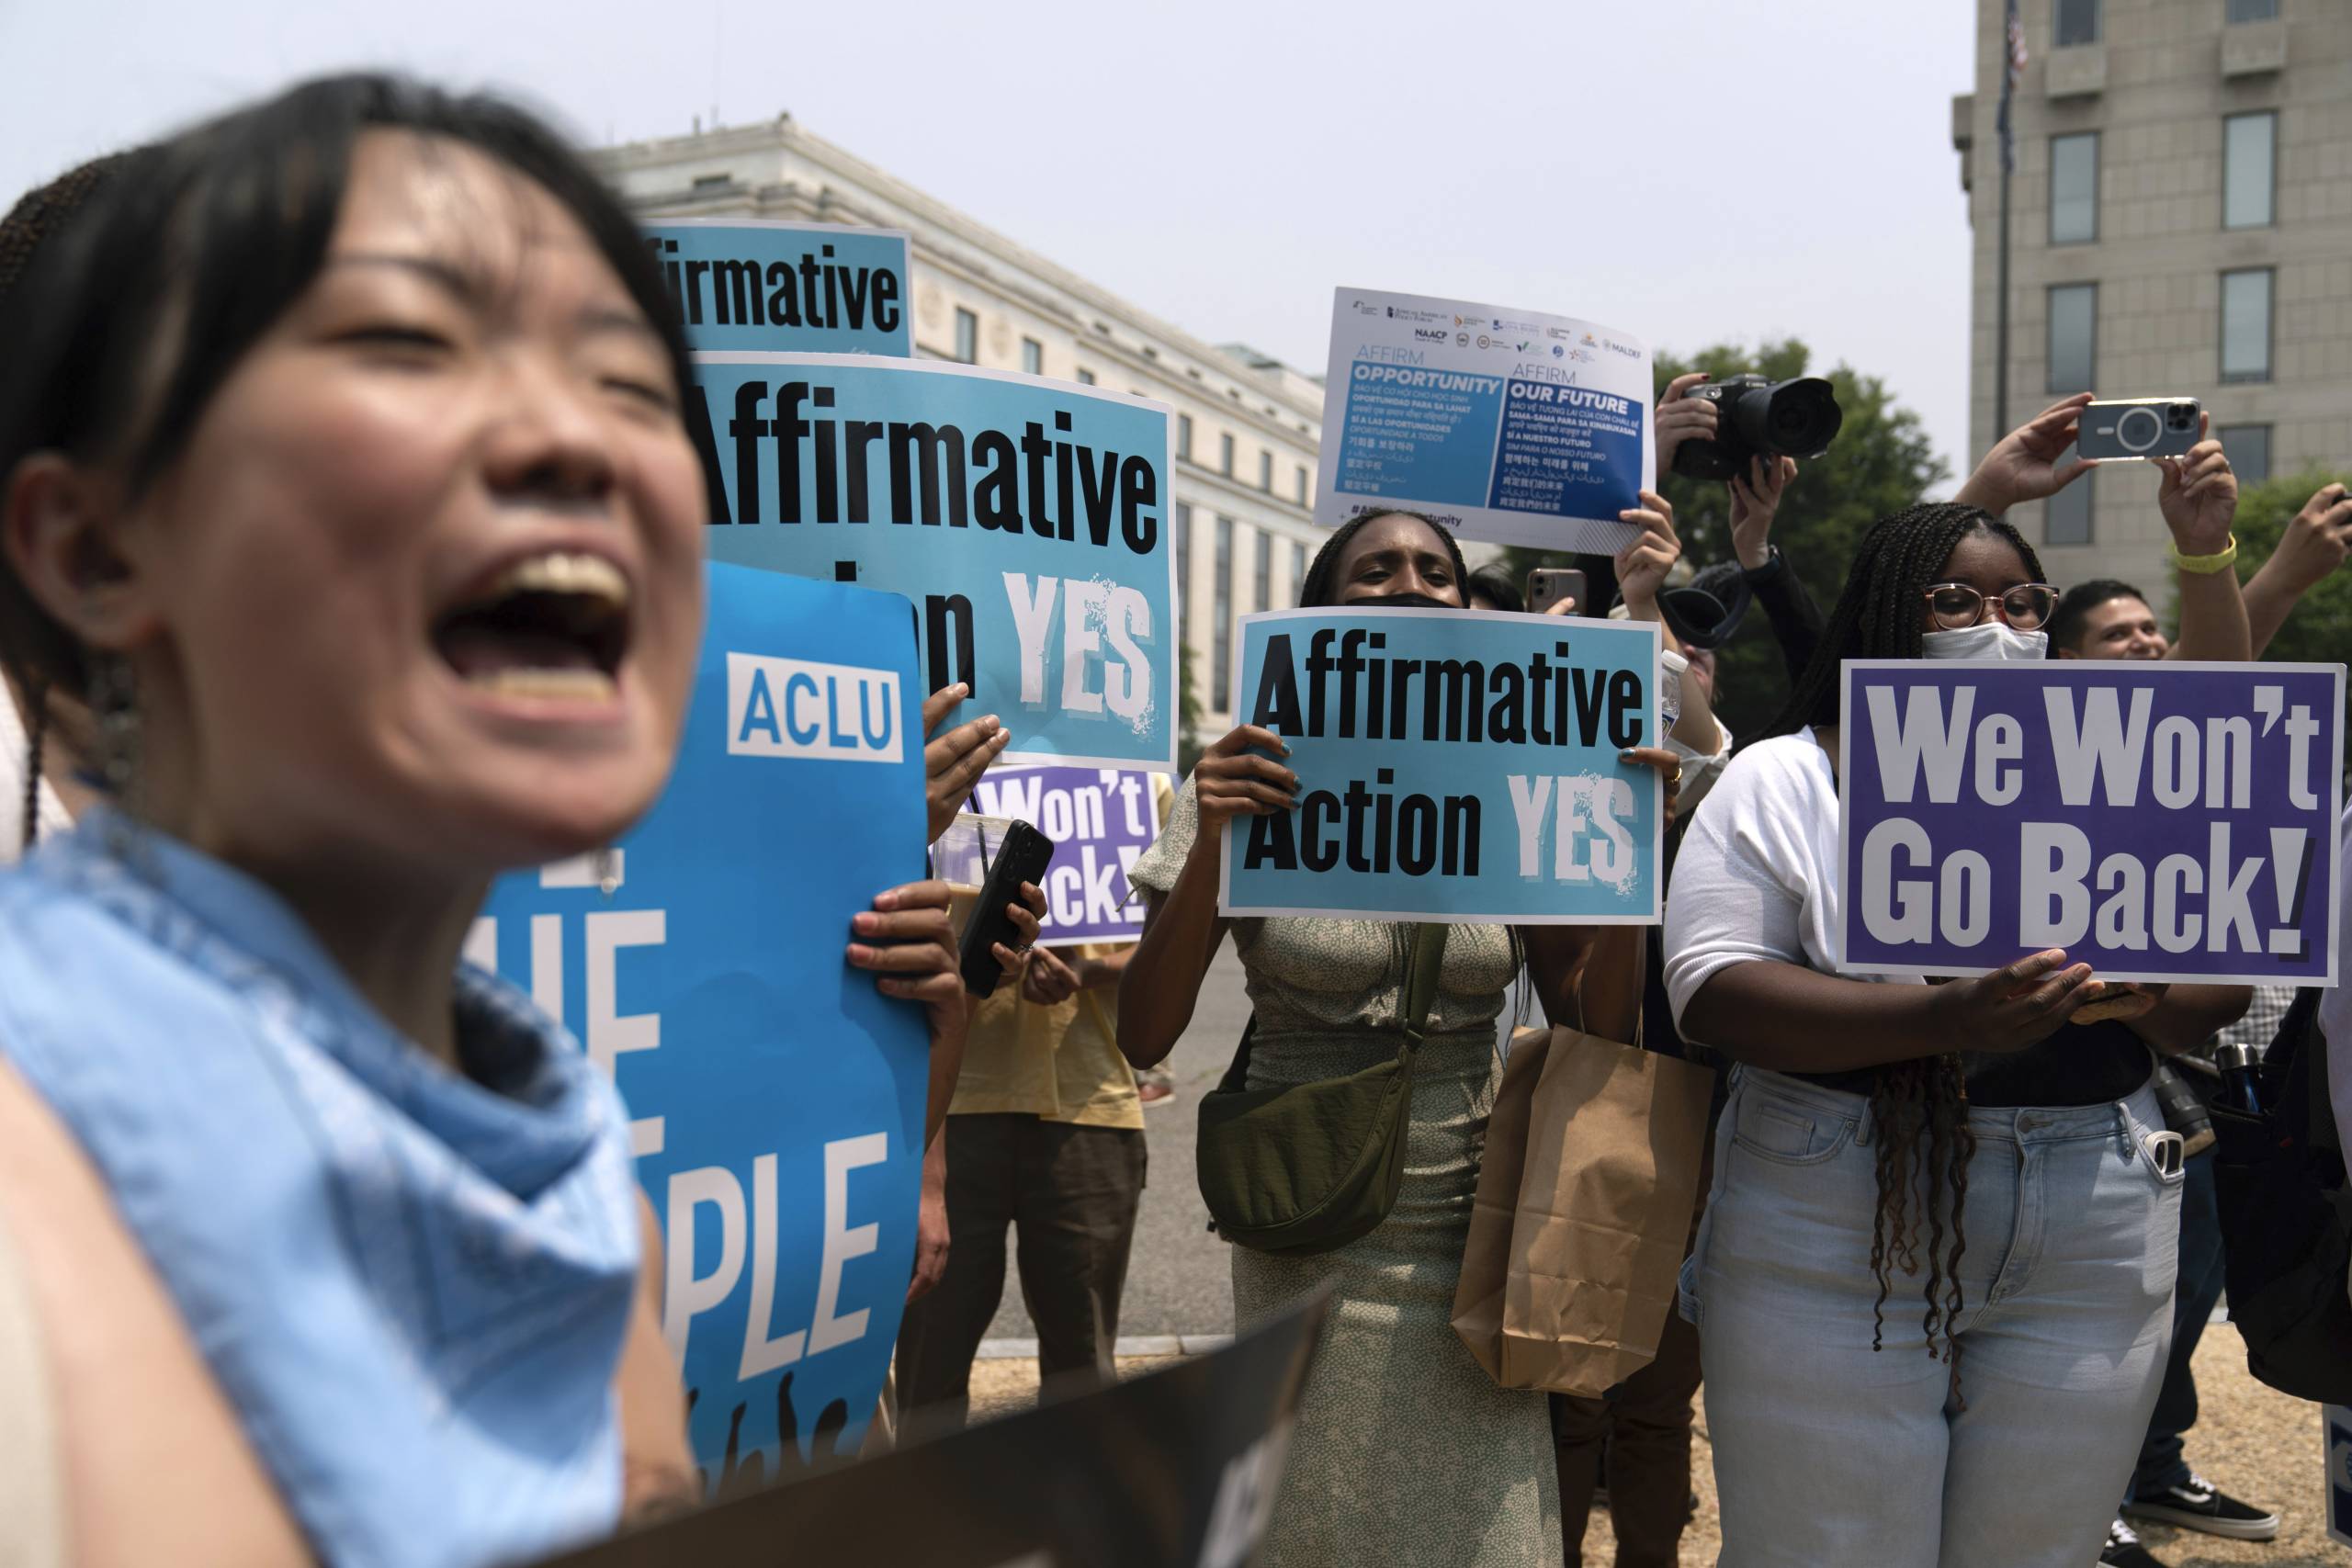 Supreme Court strikes down affirmative action in college admissions